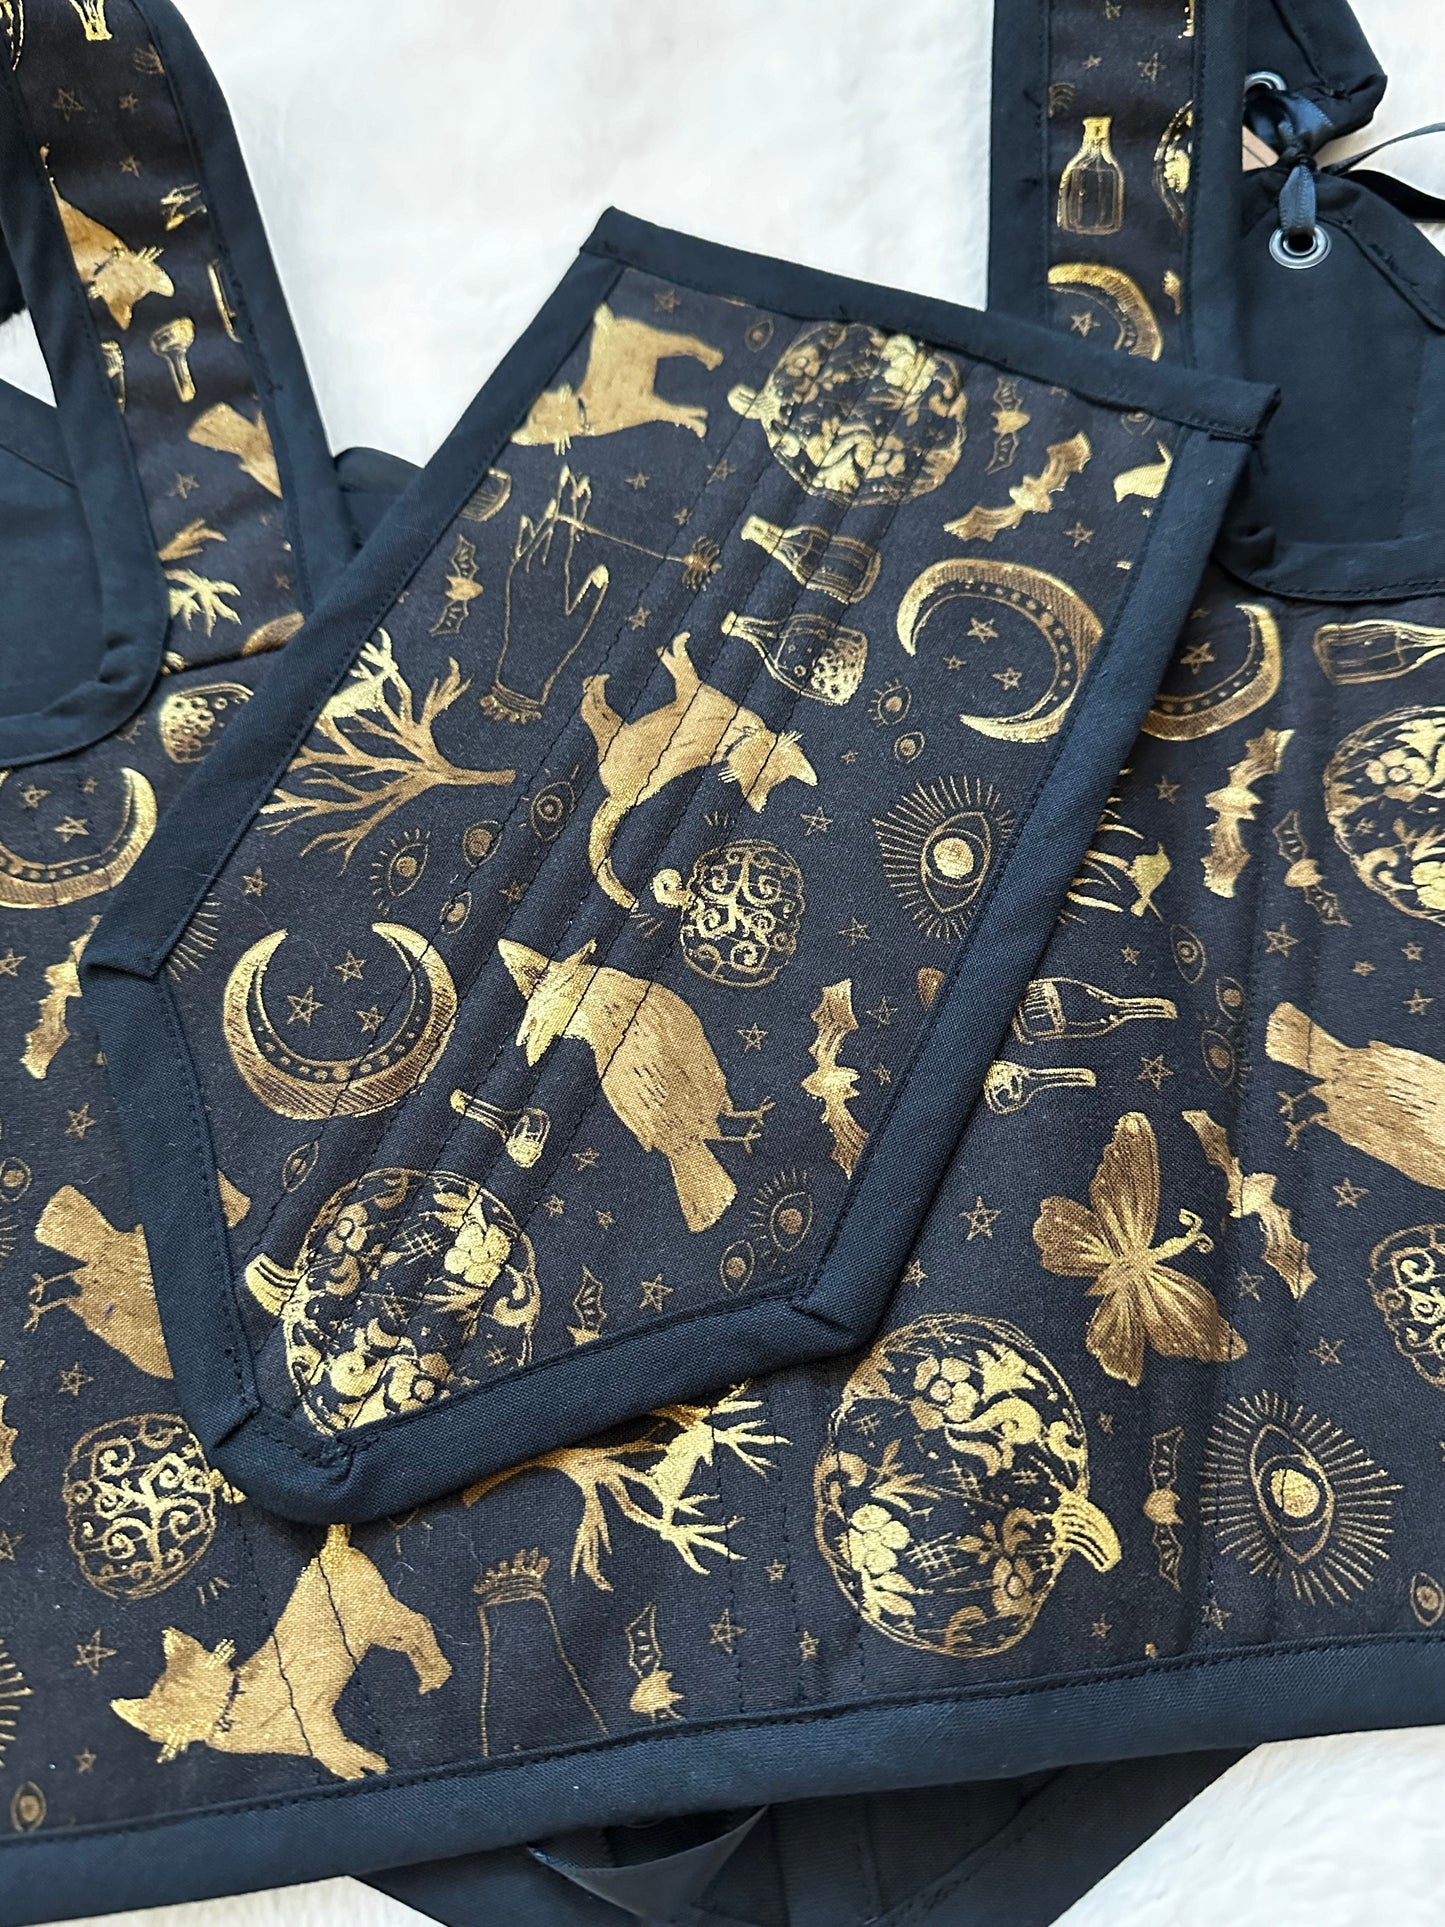 Back view of renaissance bodice in black fabric with gold patterned print. Pattern contains cats, trees, moons, bottles, and moths in gold. Also shown is the stomacher. Bodice is on a white fuzzy blanket.